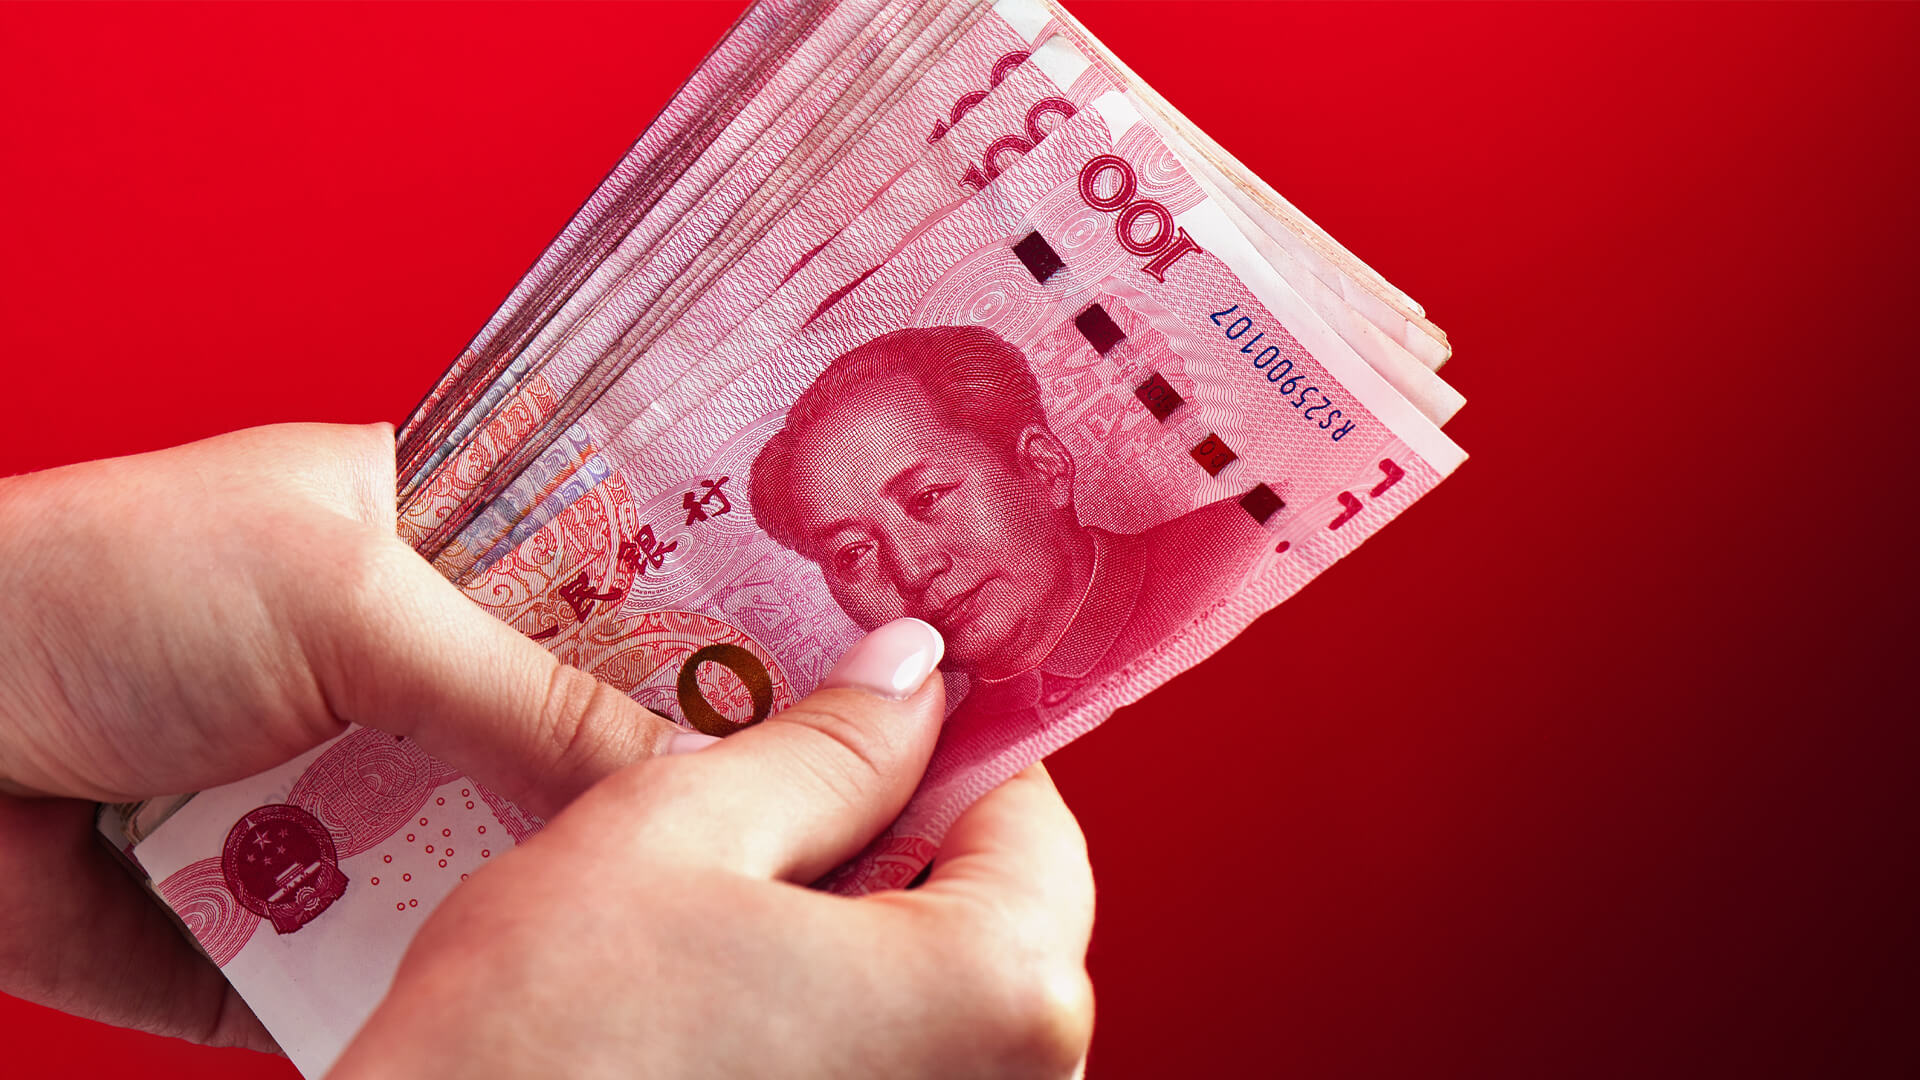 A pile of RMB banknotes of Chinese yuan money in a female hand on a red background